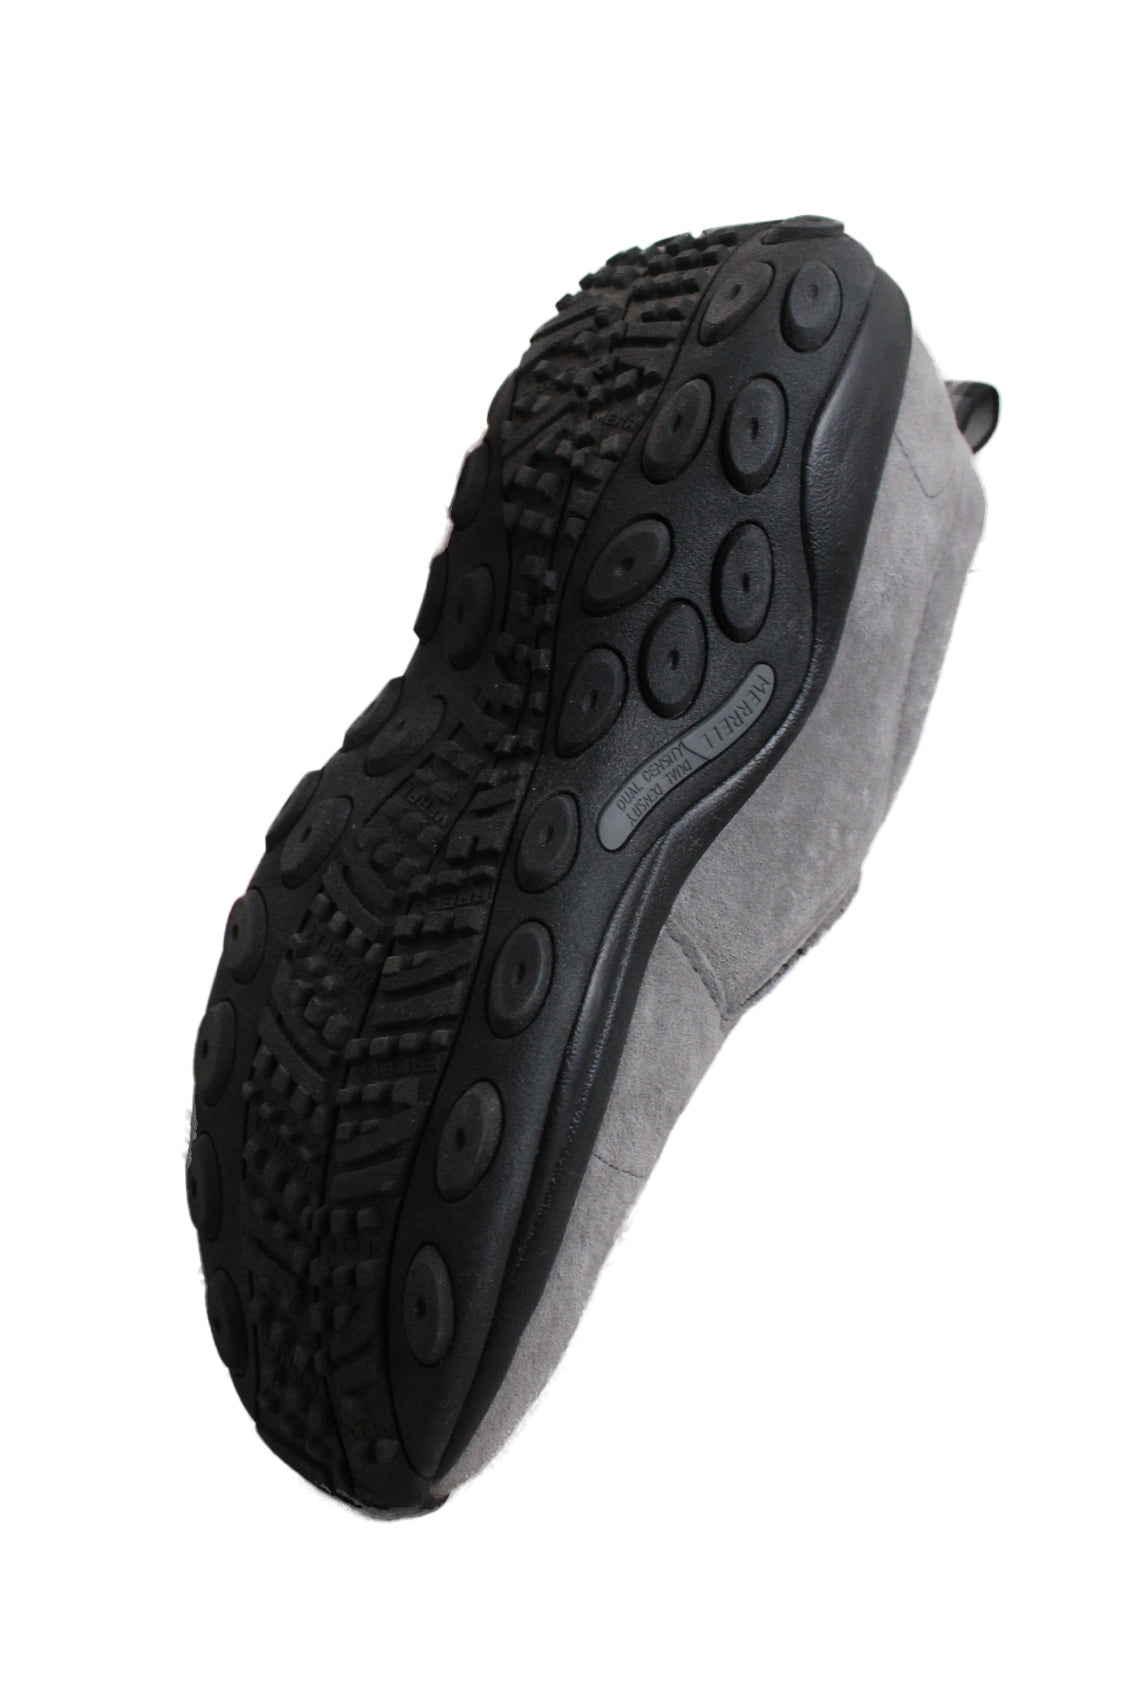 underside view with 'merrell dual density' branding at soles side of shoe.